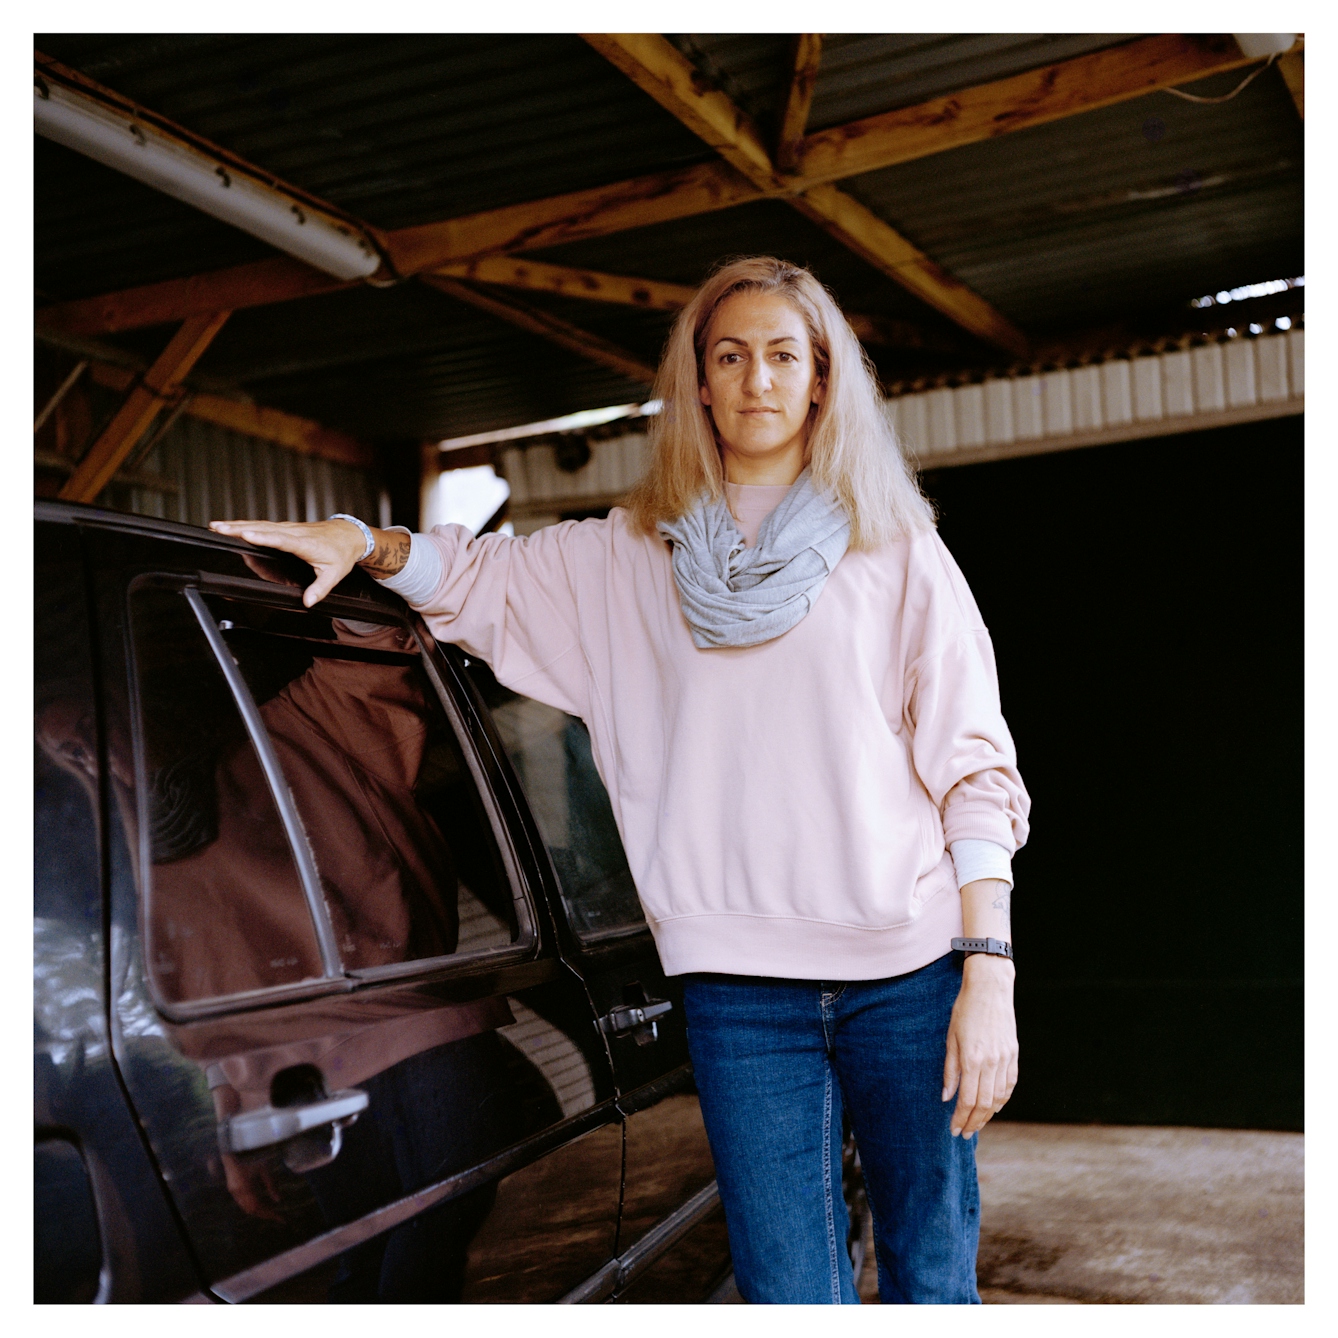 Portrait photograph of Hannah, a woman with shoulder-length blonde hair, leaning against a black car in a garage. She is wearing a pink sweatshirt, a grey scarf and blue jeans. She is looking directly at the camera with a slight smile. 